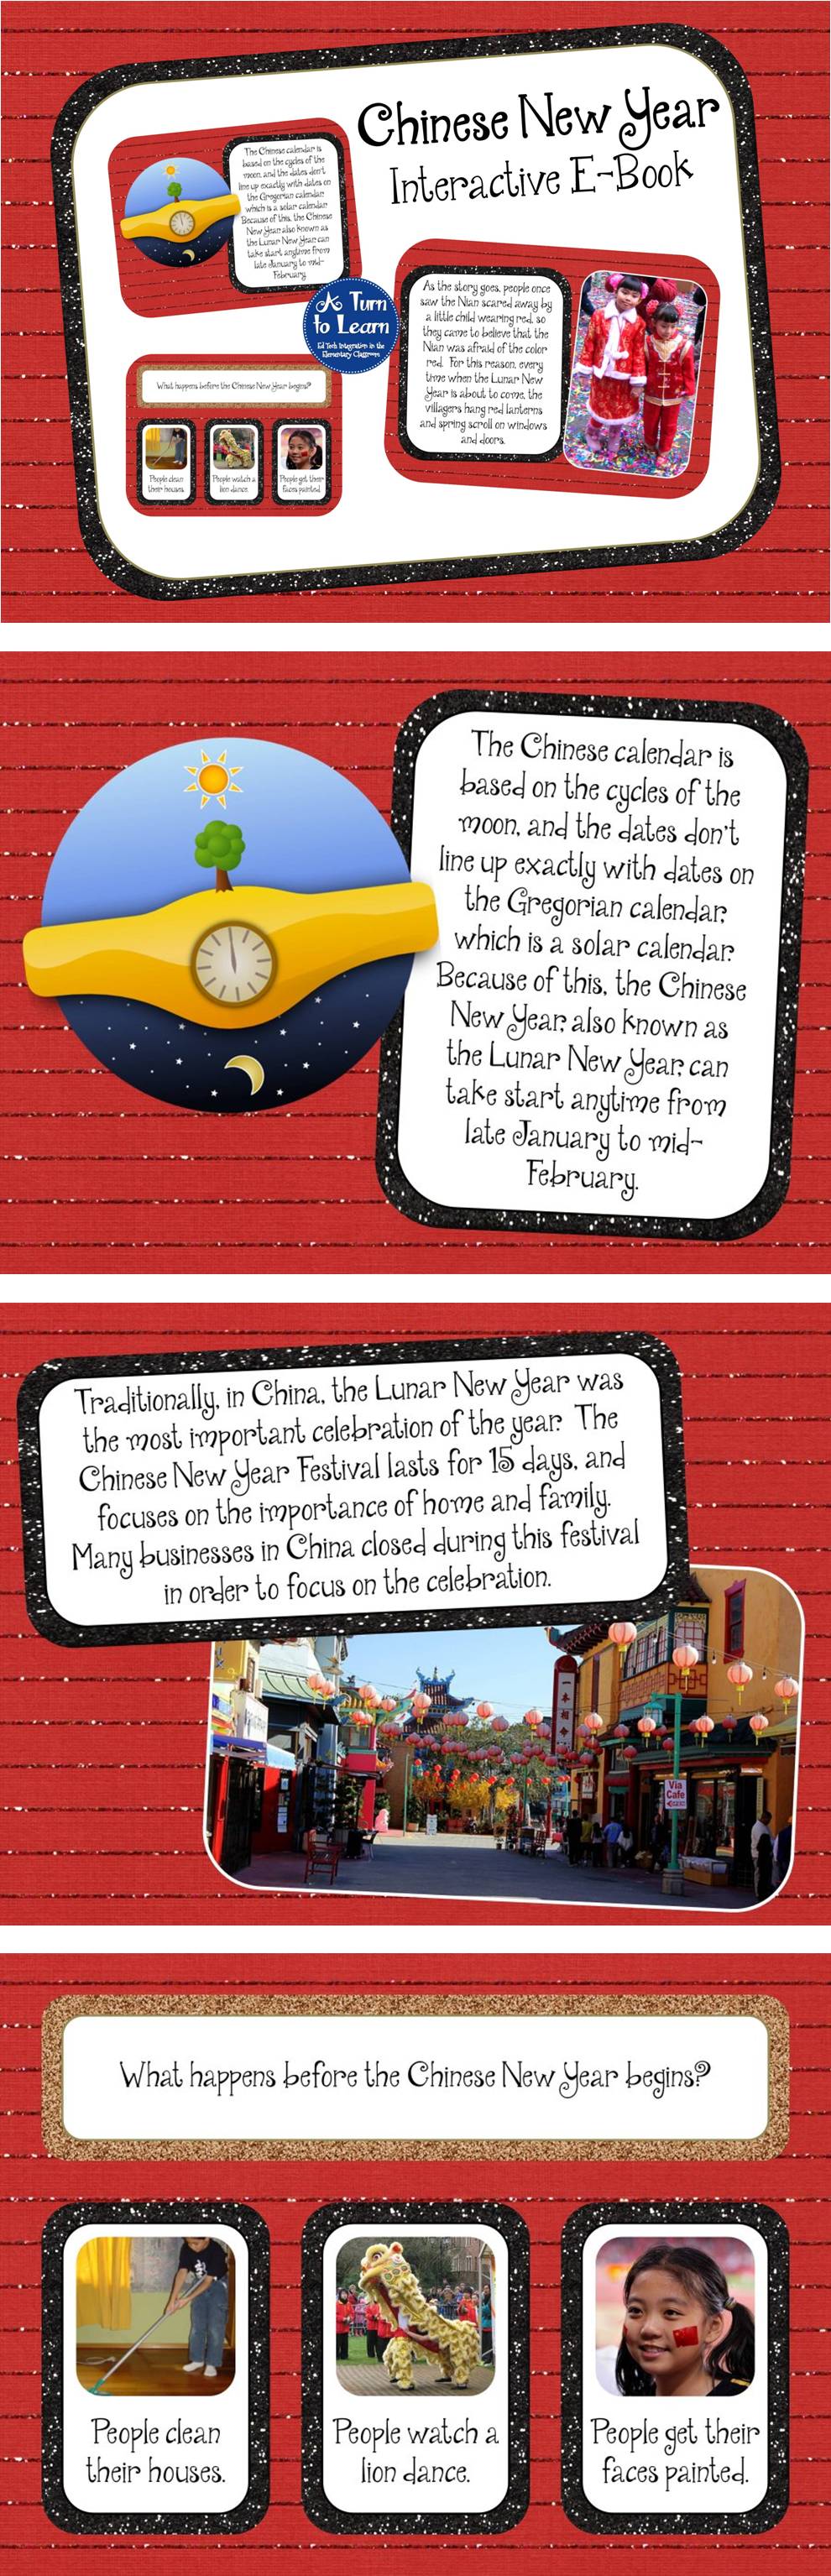 Chinese New Year Interactive E-Book. This Smartboard activity has comprehension activities to keep students engaged!